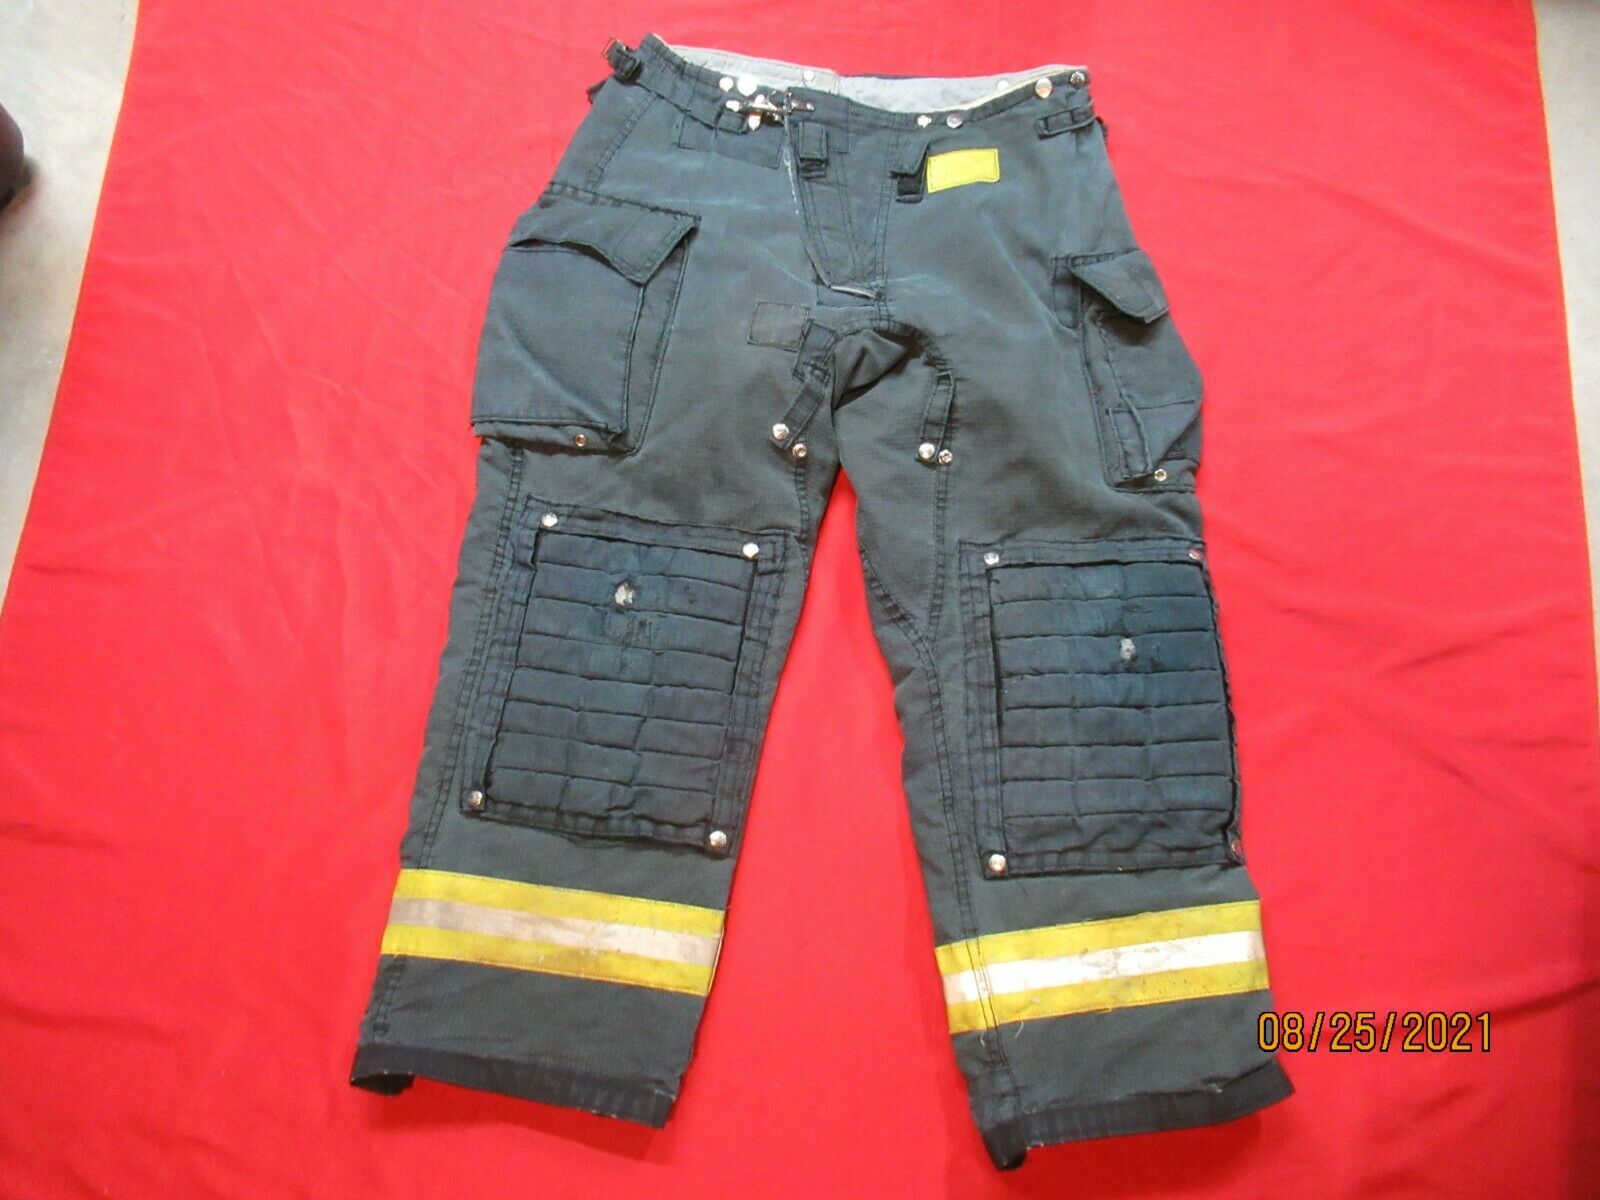 Morning Pride Fire Fighter Turnout Pants 40 X 32 Black Bunker Gear Rescue